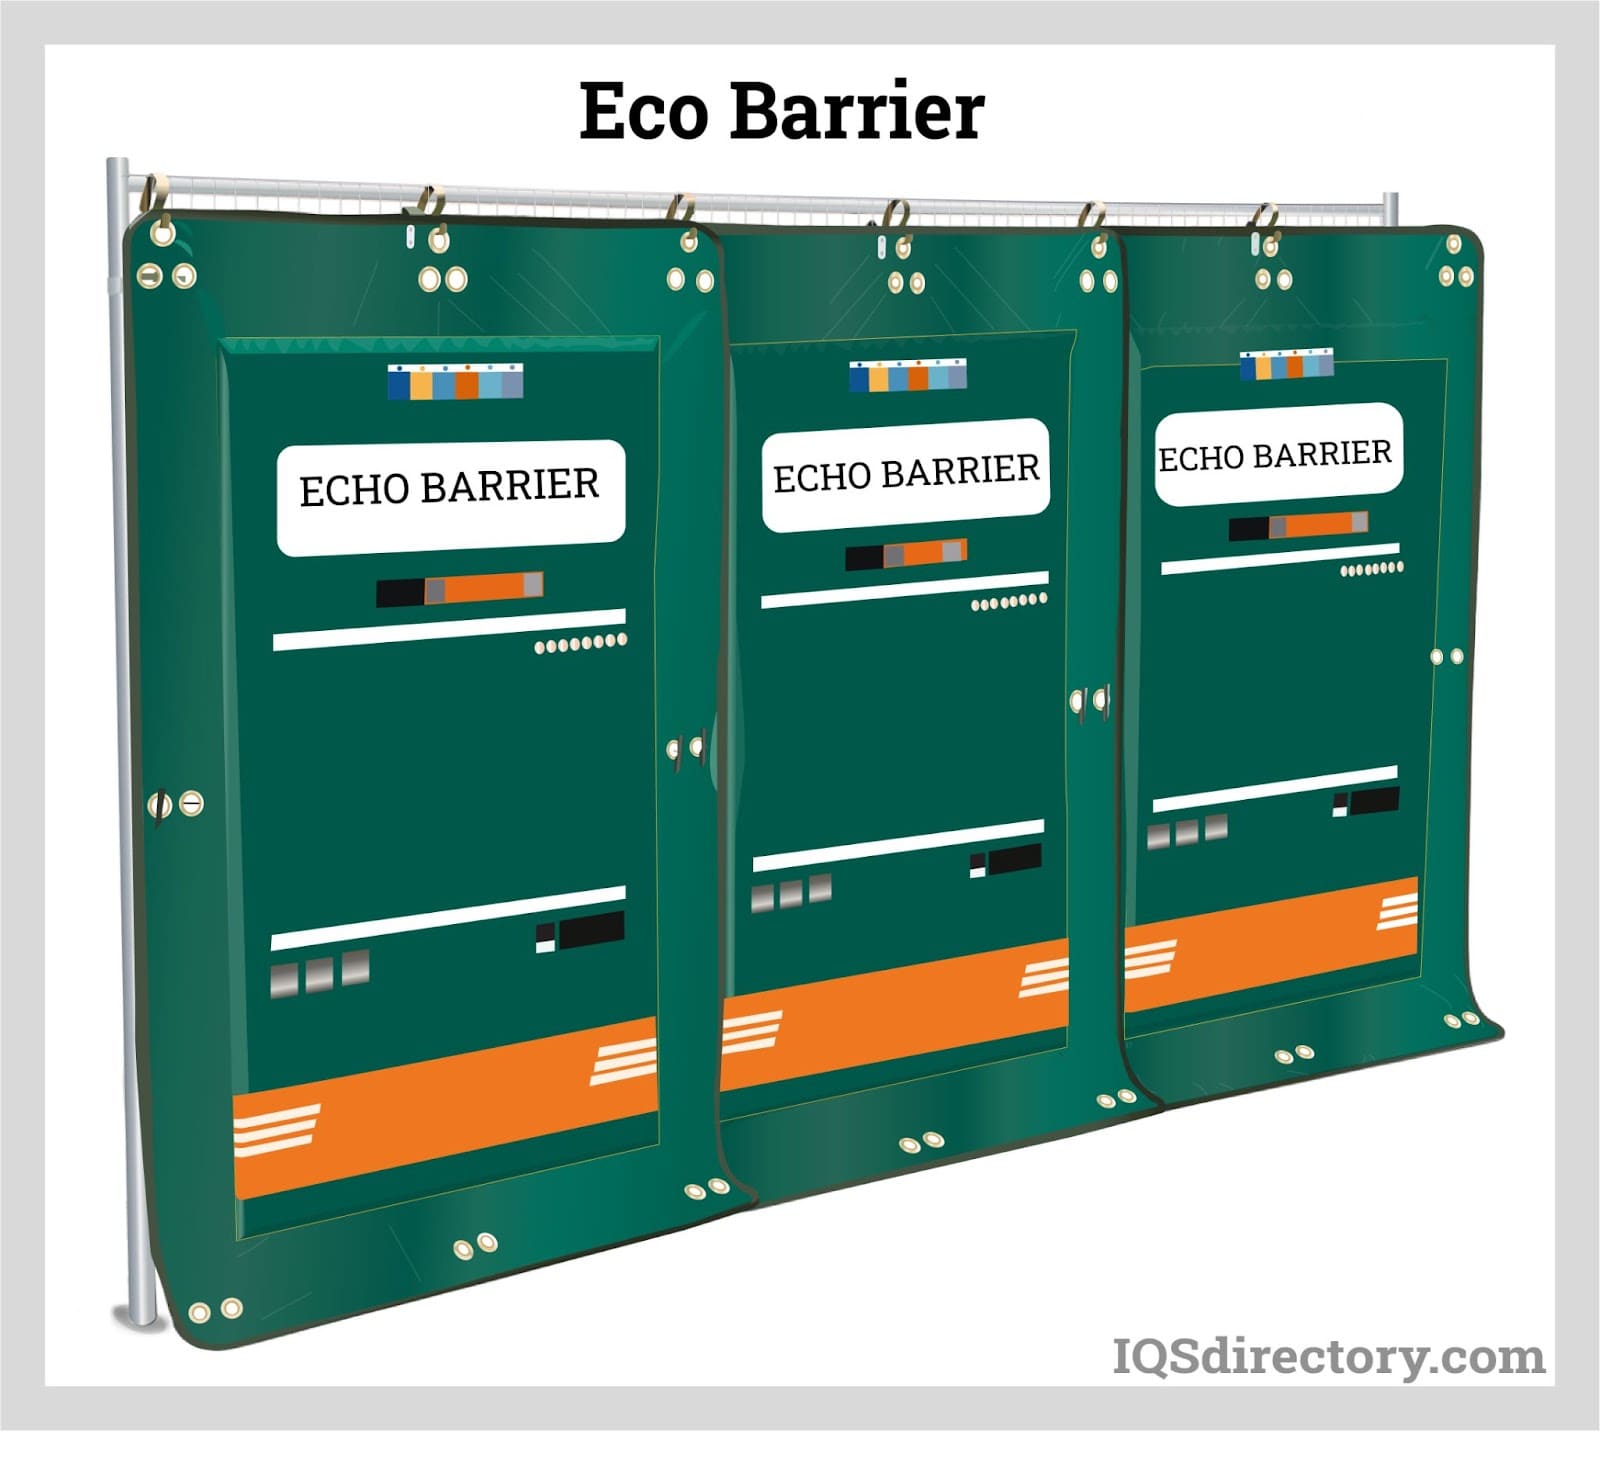 Eco Barrier